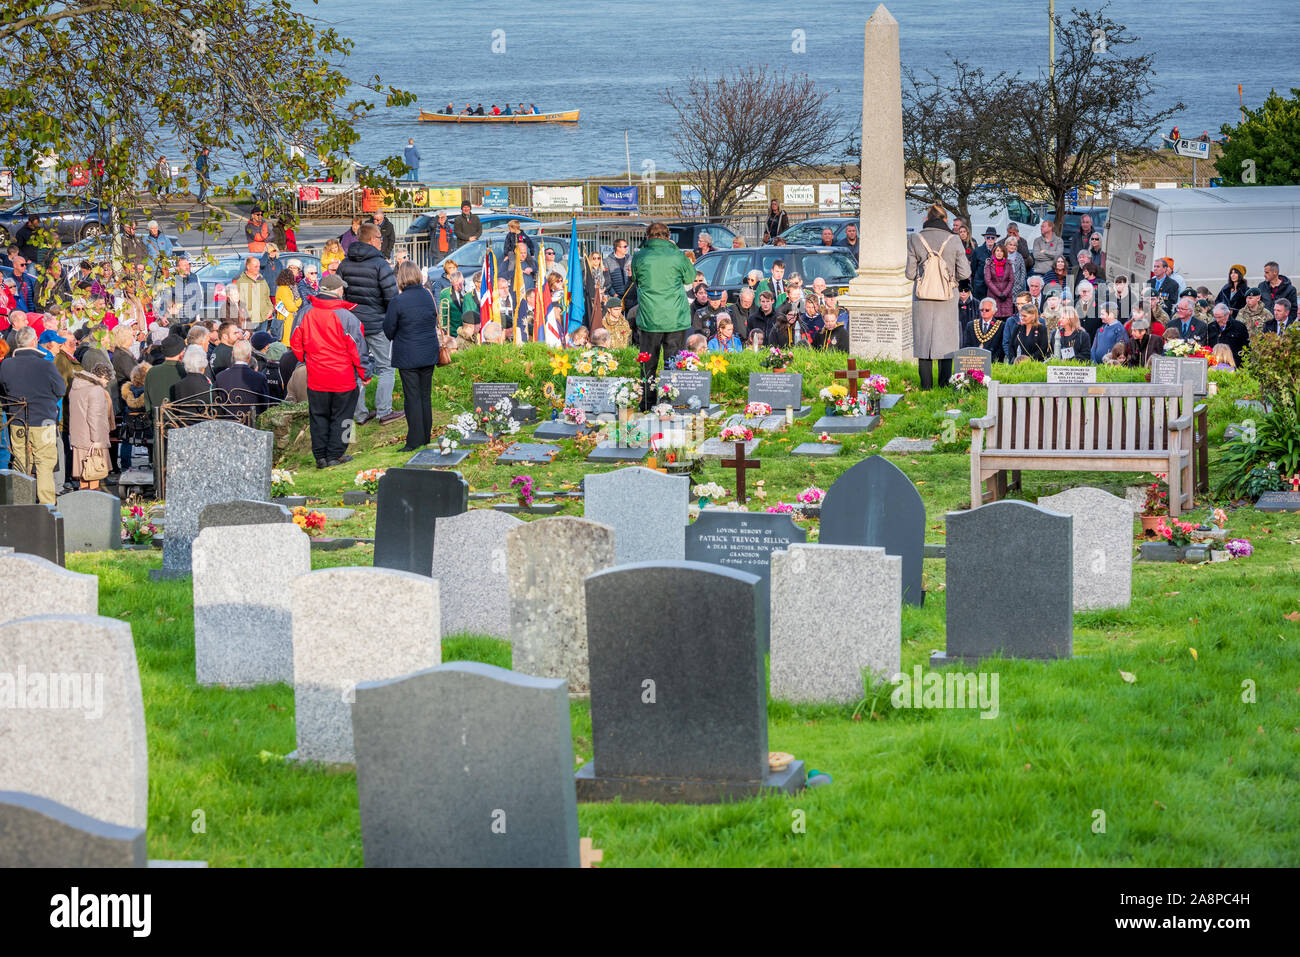 Appledore, North Devon, UK. Sunday 10th November 2019. UK Weather. Sunshine and a gentle breeze on Remembrance Sunday in North Devon. The community gathers as wreaths are laid on the Appledore village war memorial on Remembrance Sunday. Terry Mathews/Alamy Live News. Stock Photo